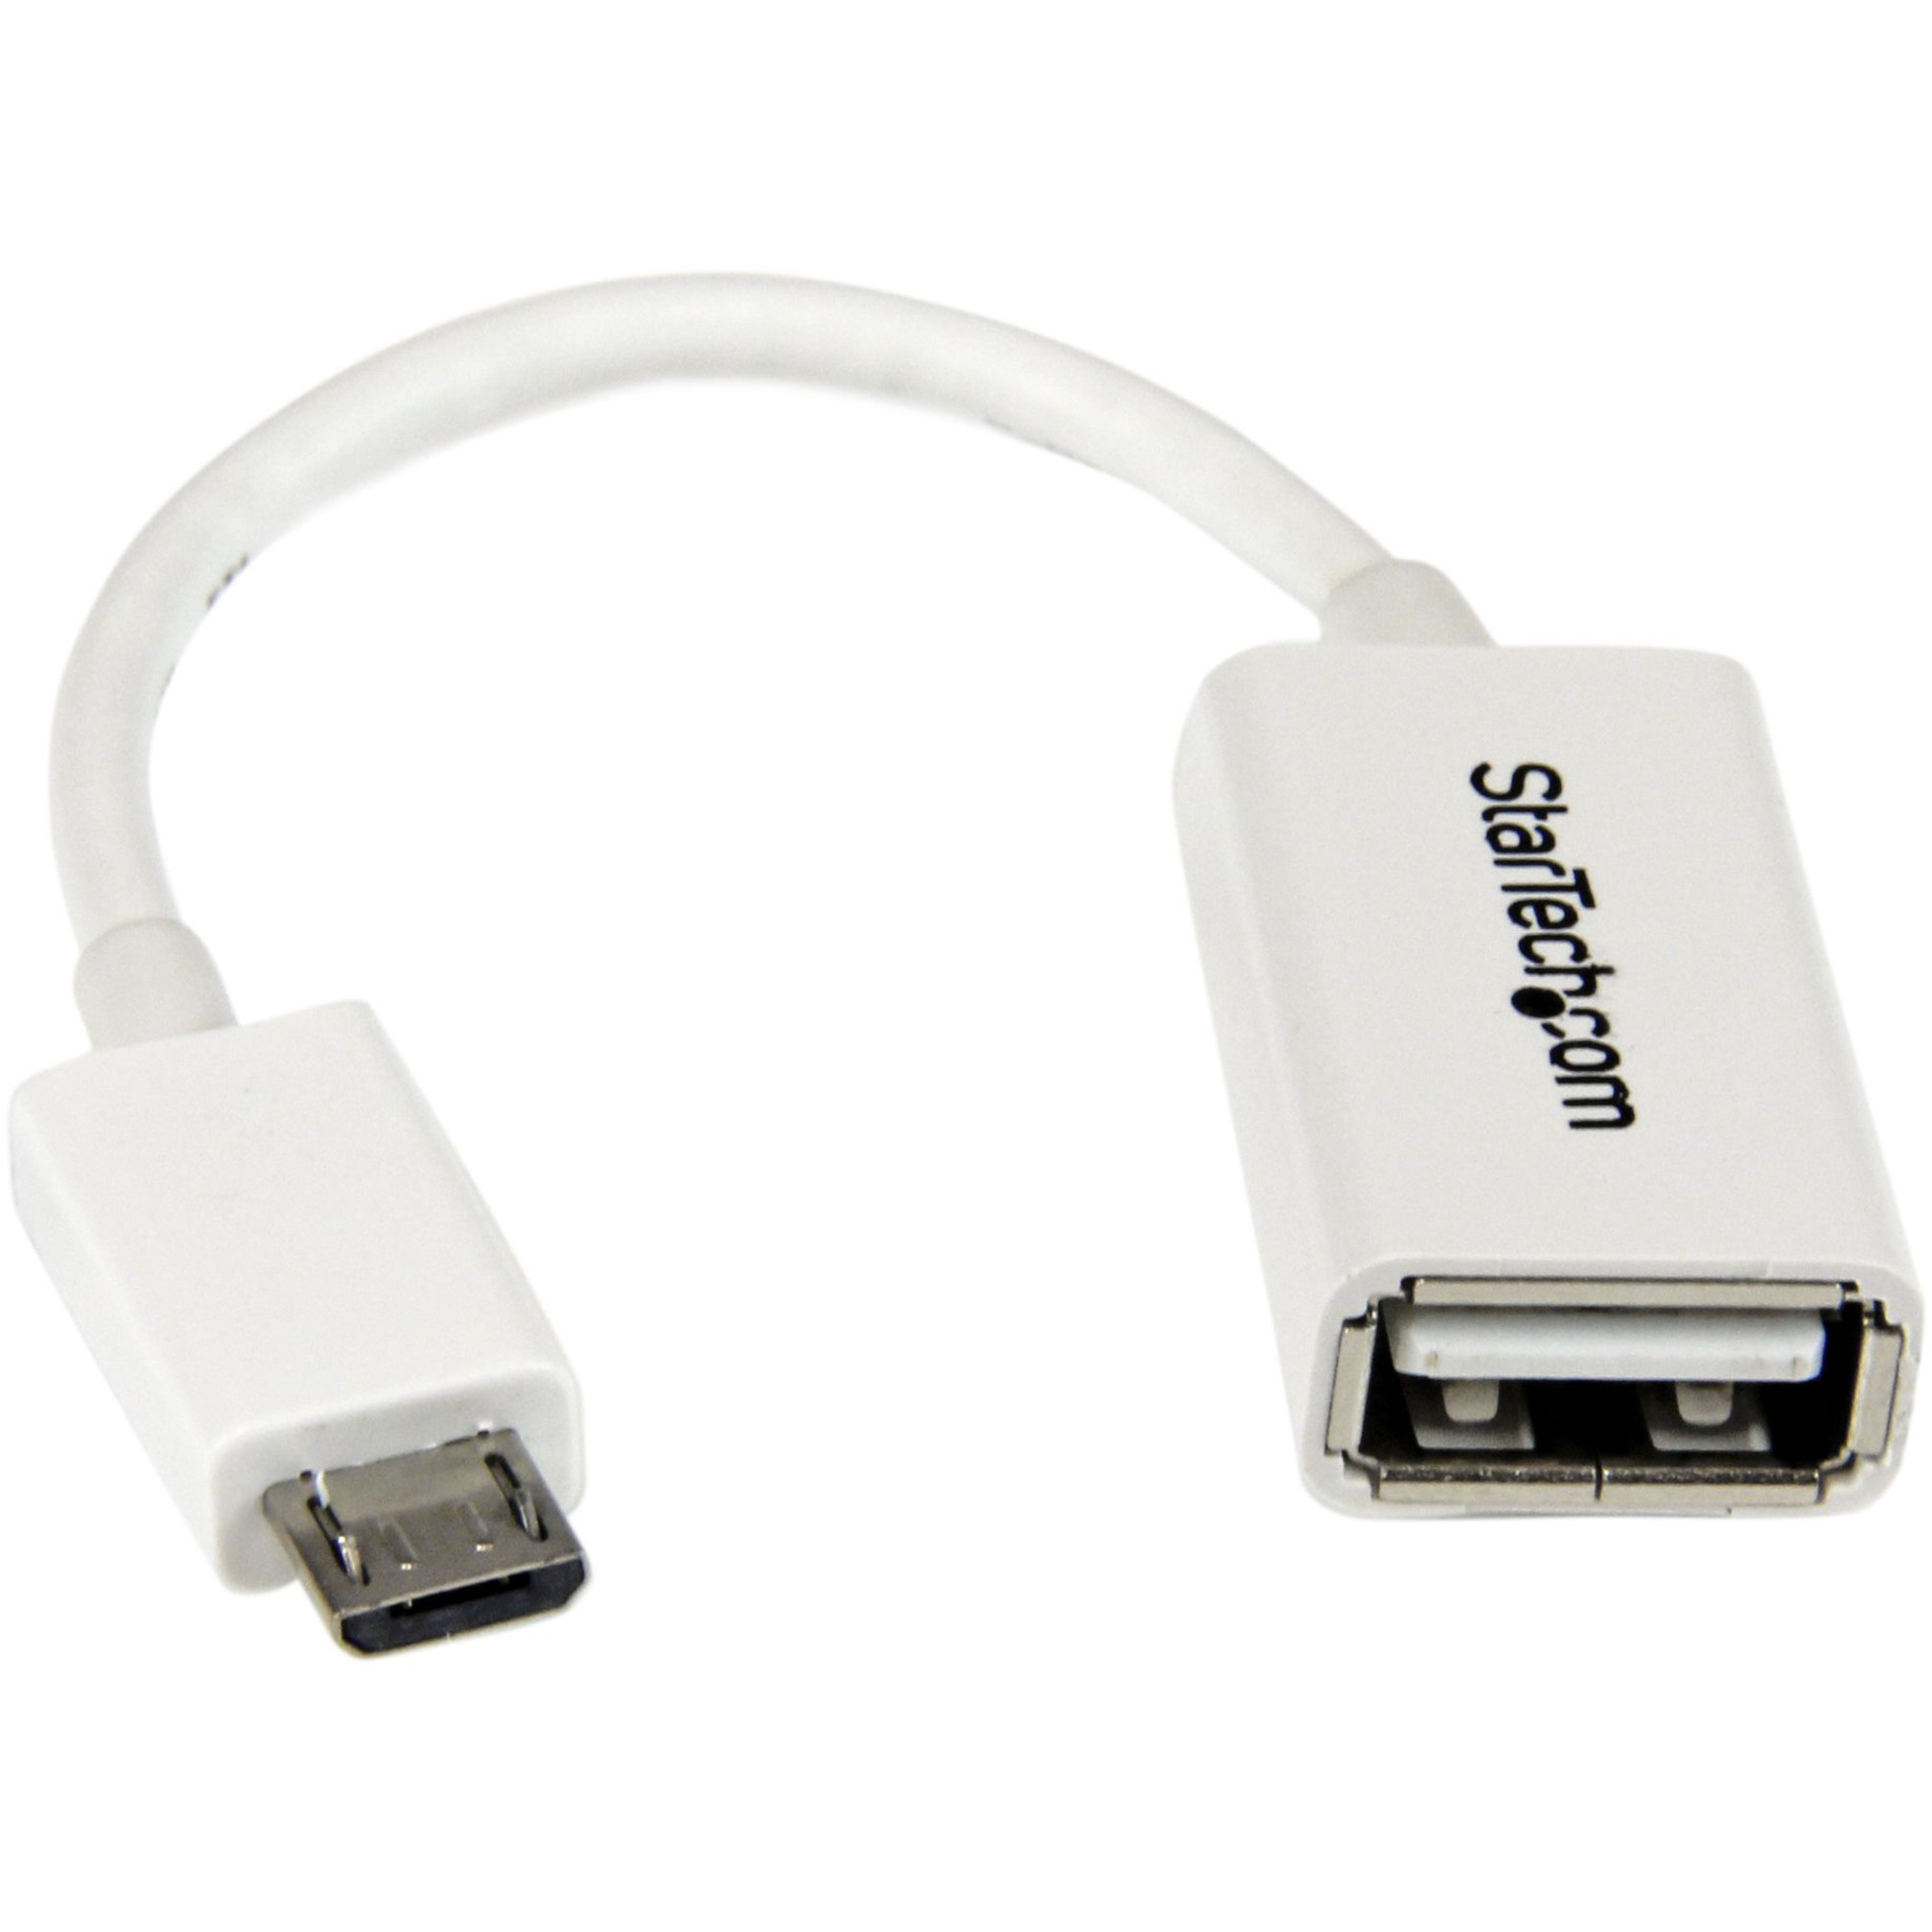 Startech .com 5in Micro USB to USB OTG Host Adapter M/FConnect your USB On-The-Go capable tablet computer or to USB 2.0 devi... UUSBOTGW - Corporate Armor